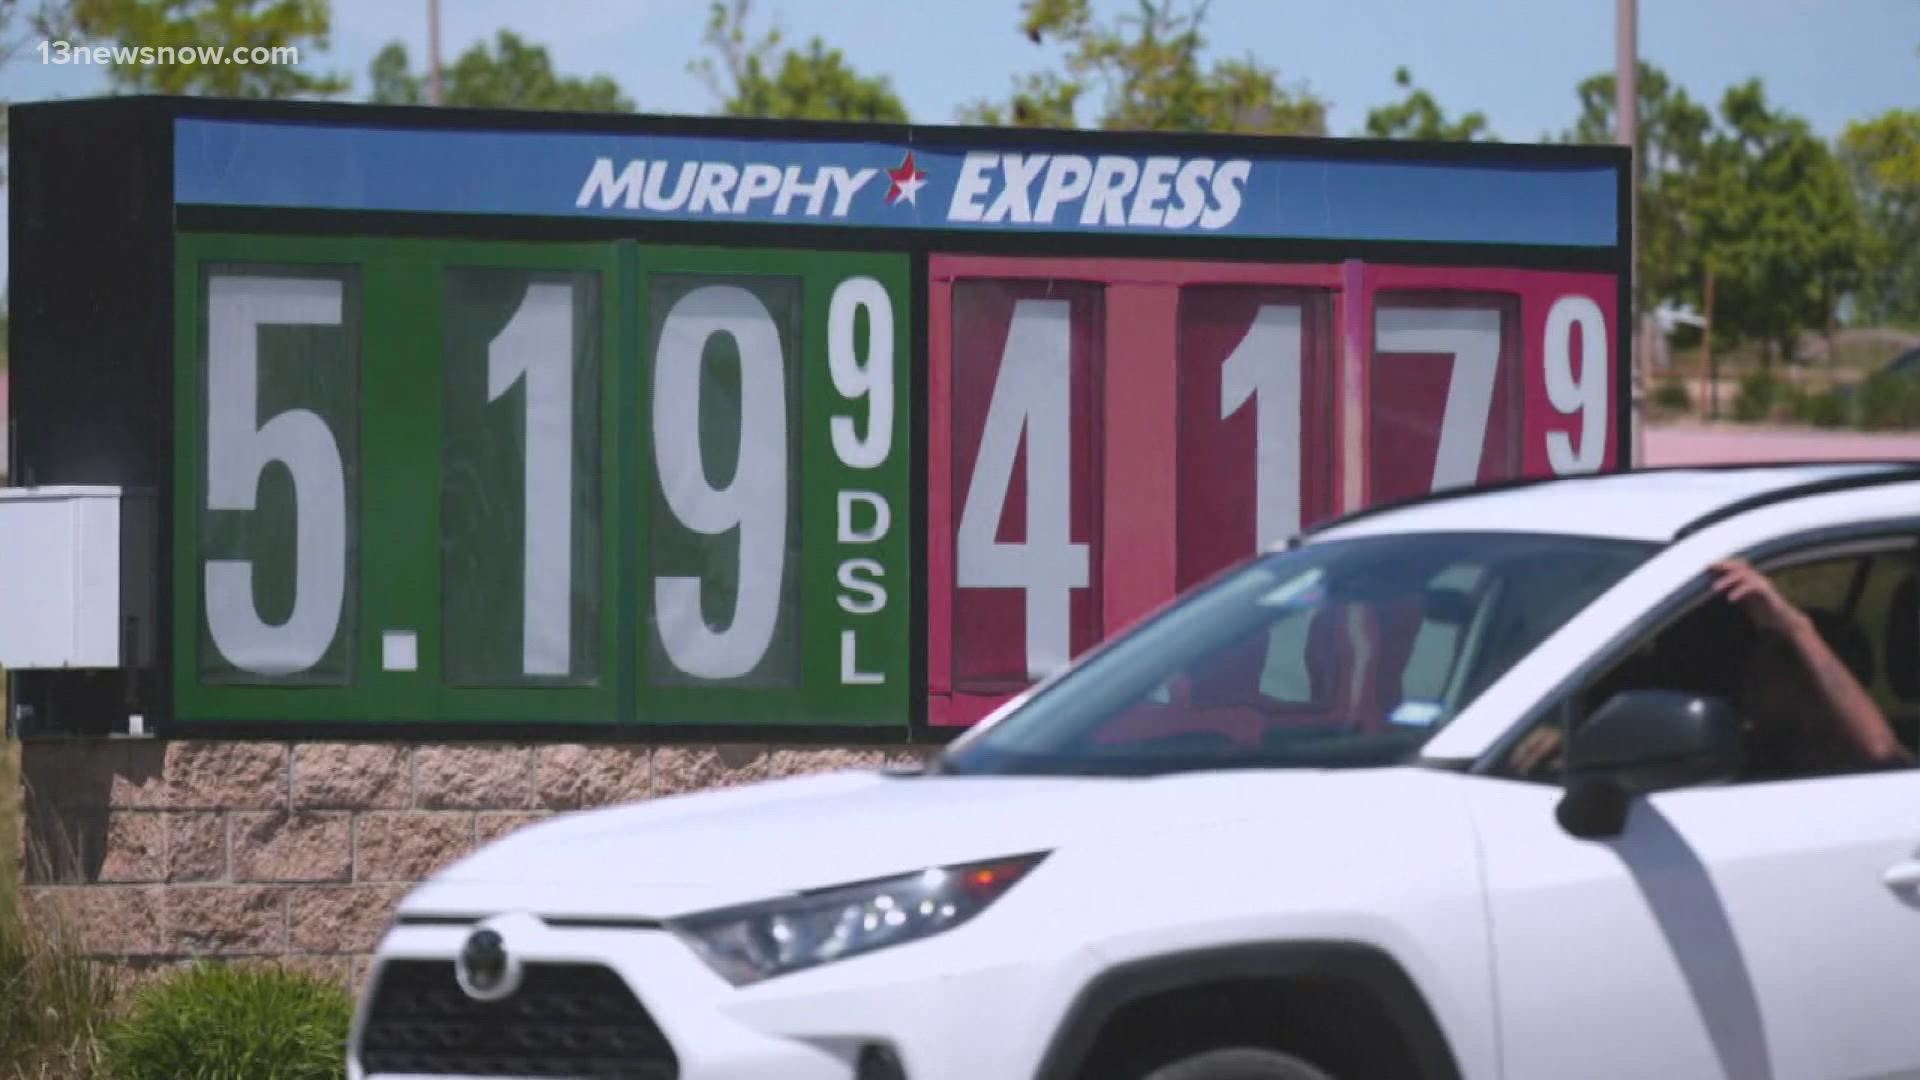 13 states have an average gas price above $5 a gallon, more than a quarter of the United States.